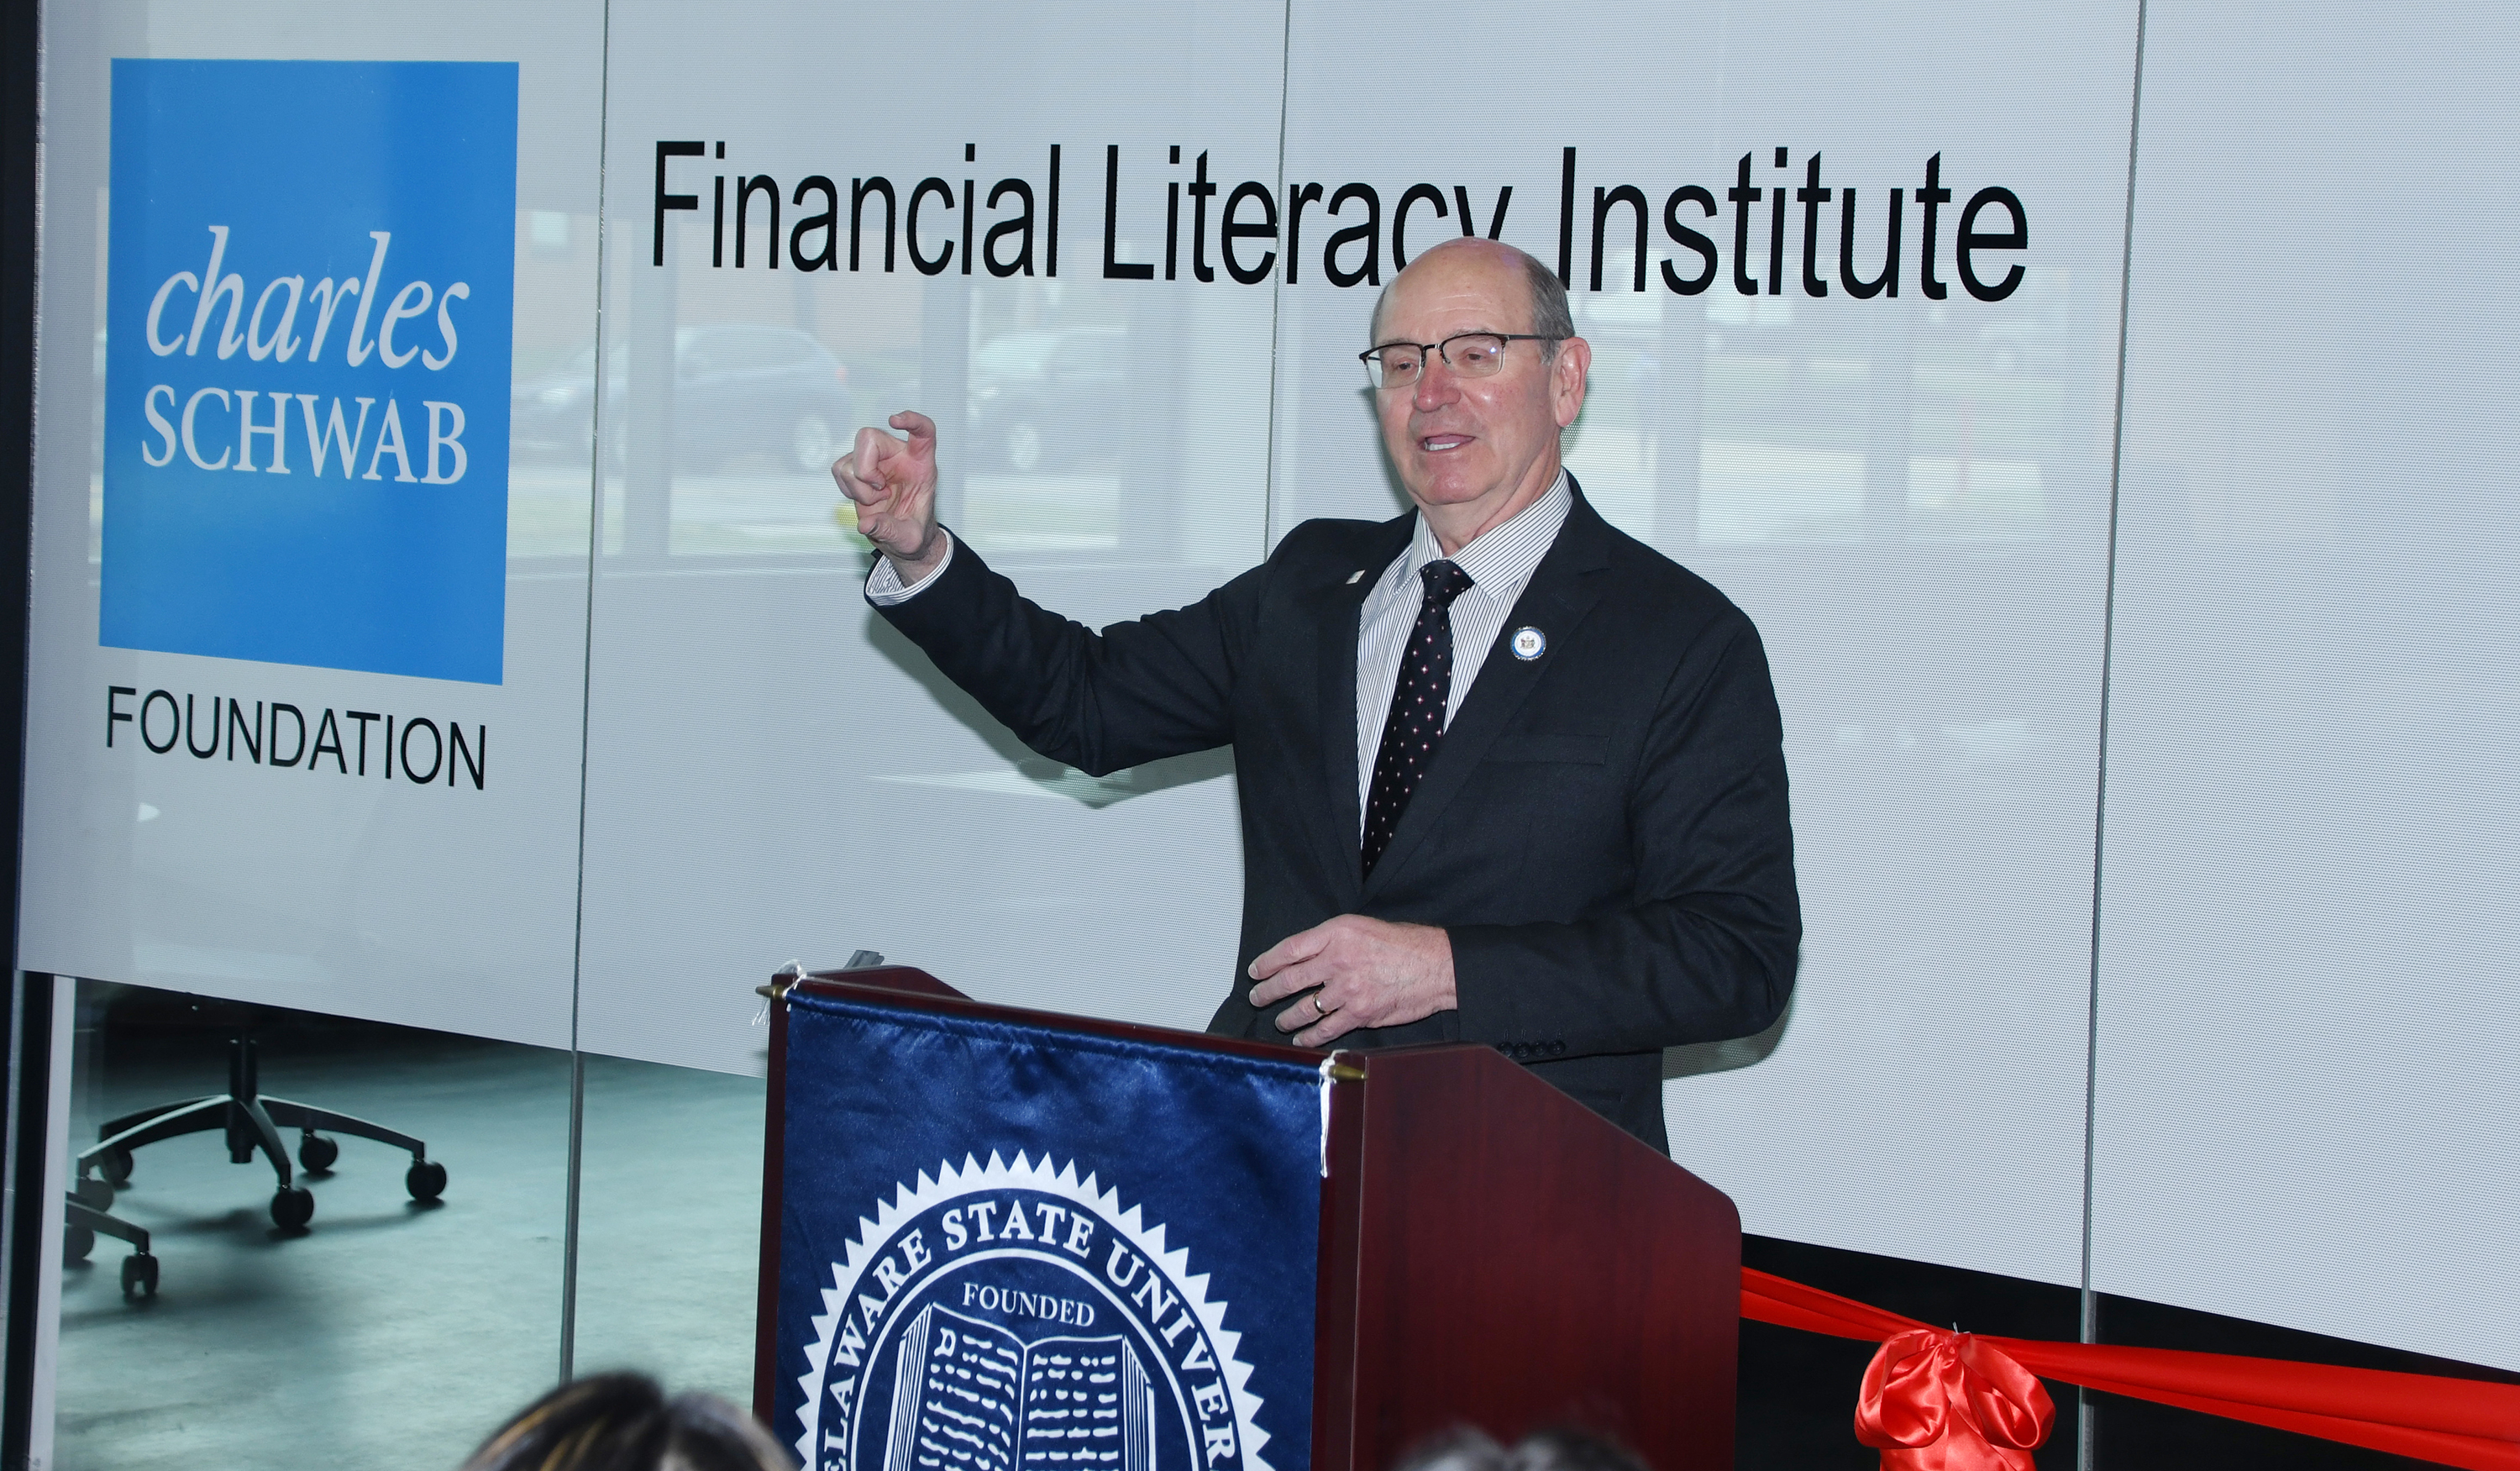 Del. Rep. Jeff Hilovsky spoke of the need for greater financial literacy among the First State populace.